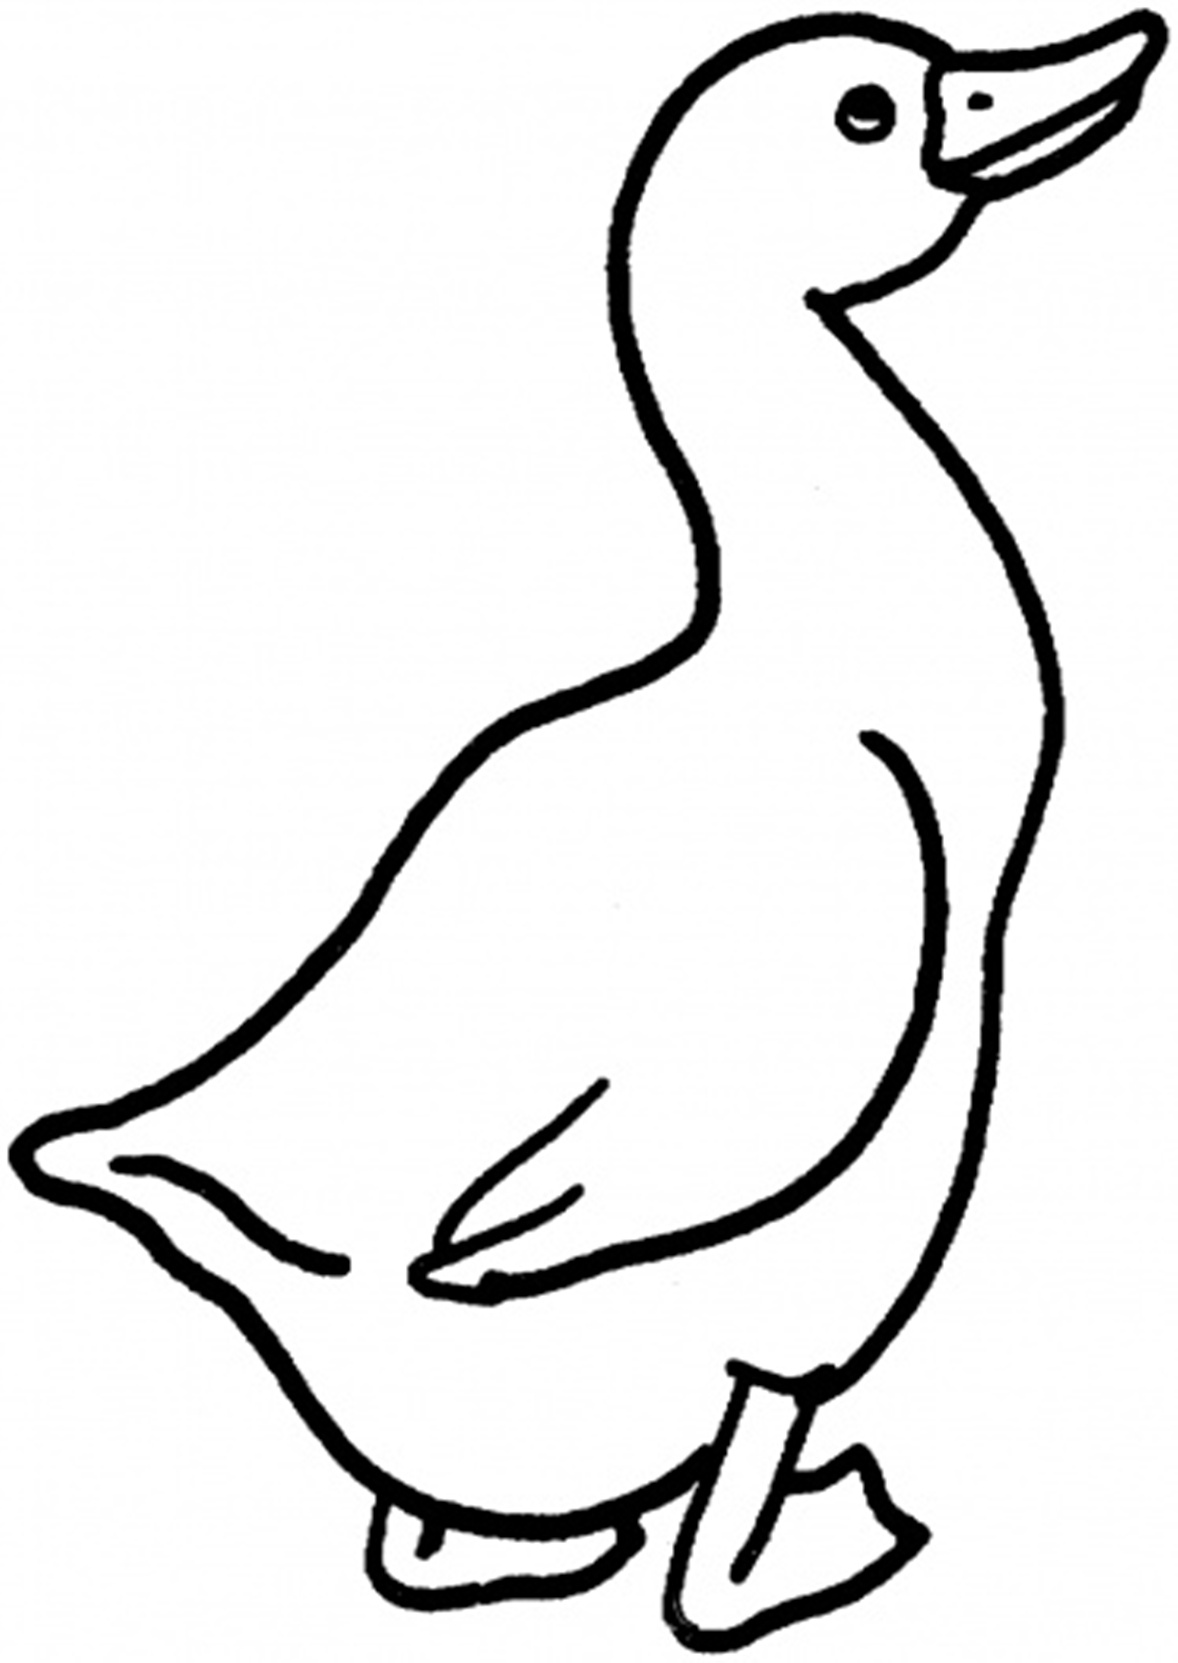 Goose Printable Animal S For Childrenae20 Coloring Page